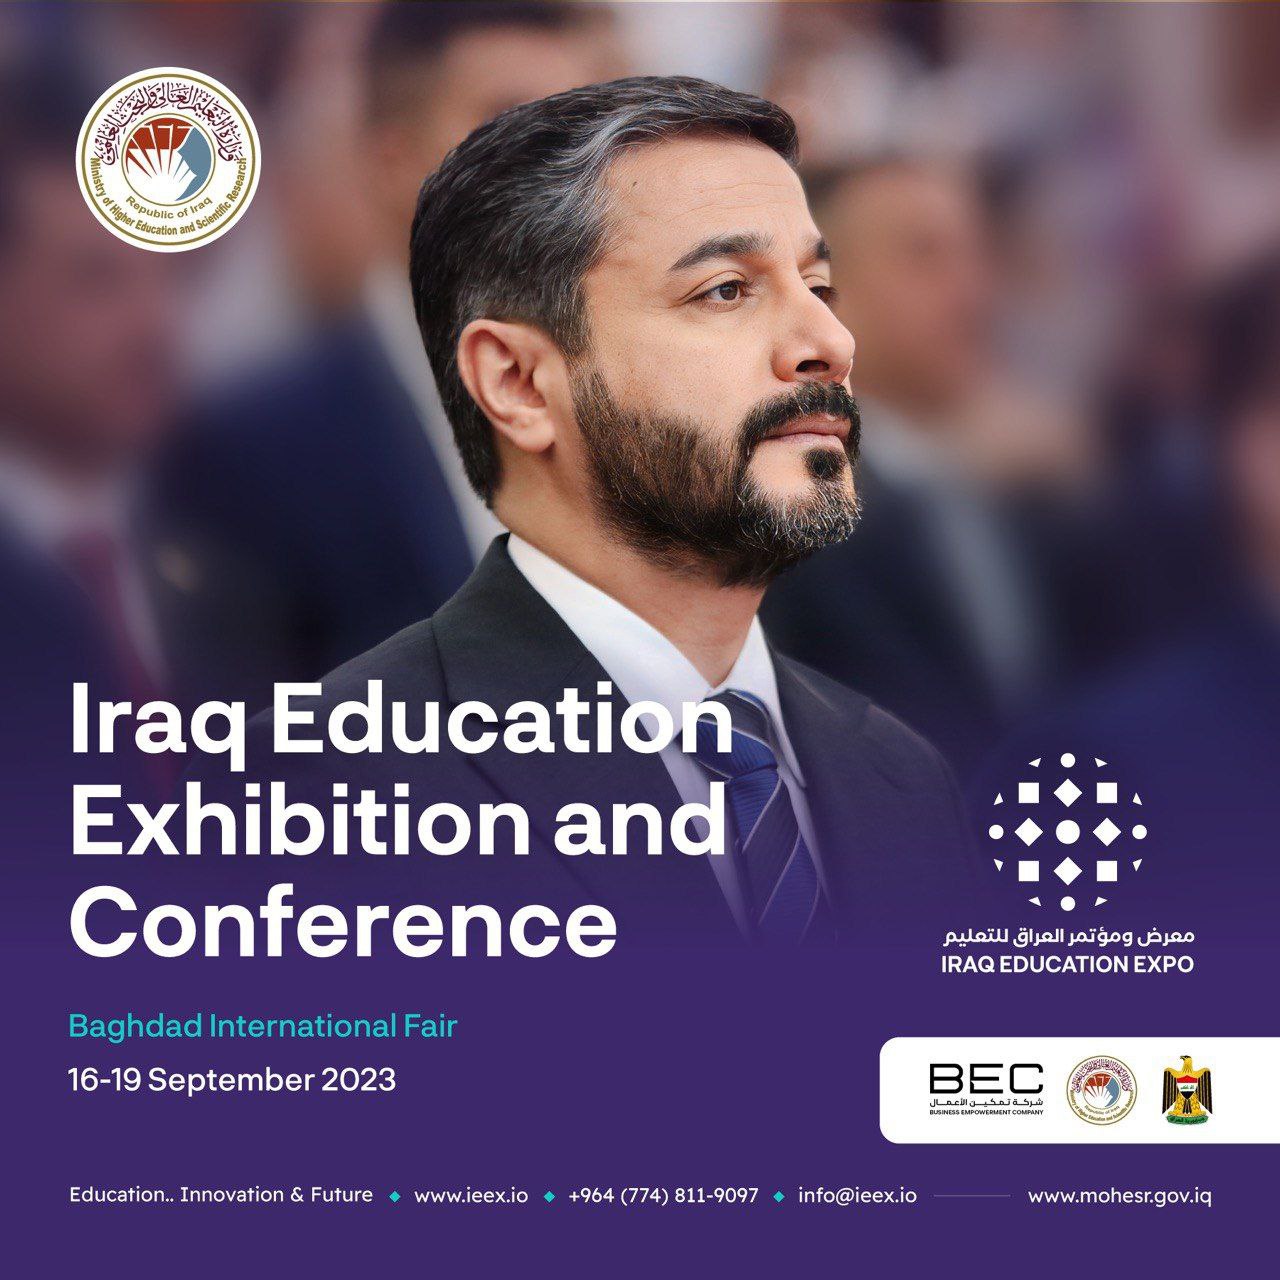 You are currently viewing Stay Tuned for Iraq Education Exhibition and Conference on 16-19, September, 2023